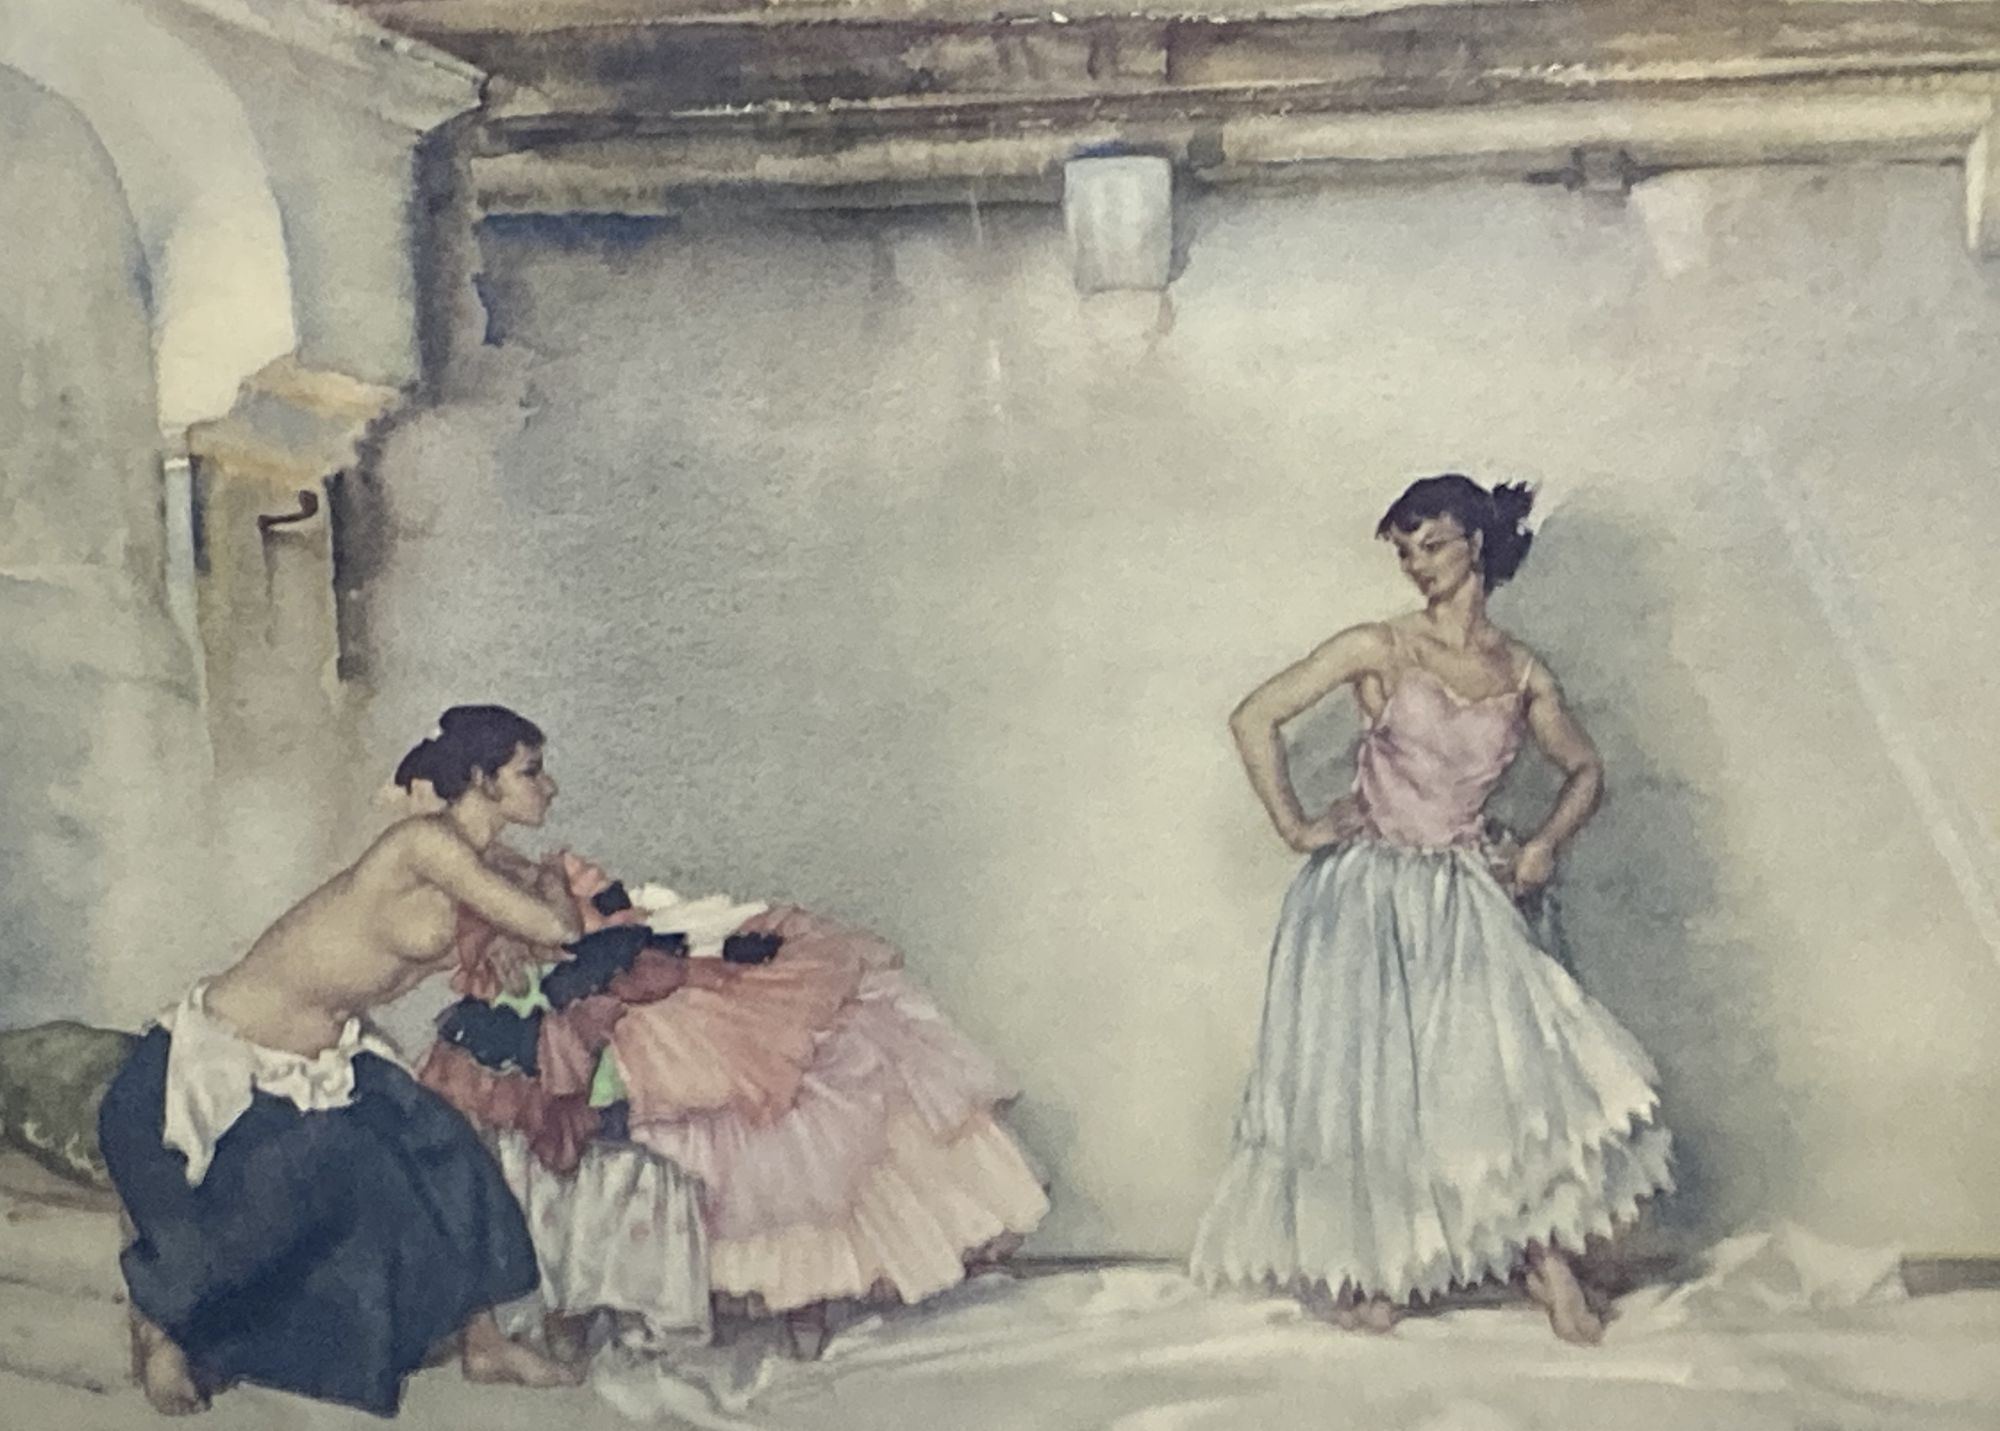 Sir William Russell Flint, limited edition print, Interior with two models, signed in pencil, 48 x 62cm